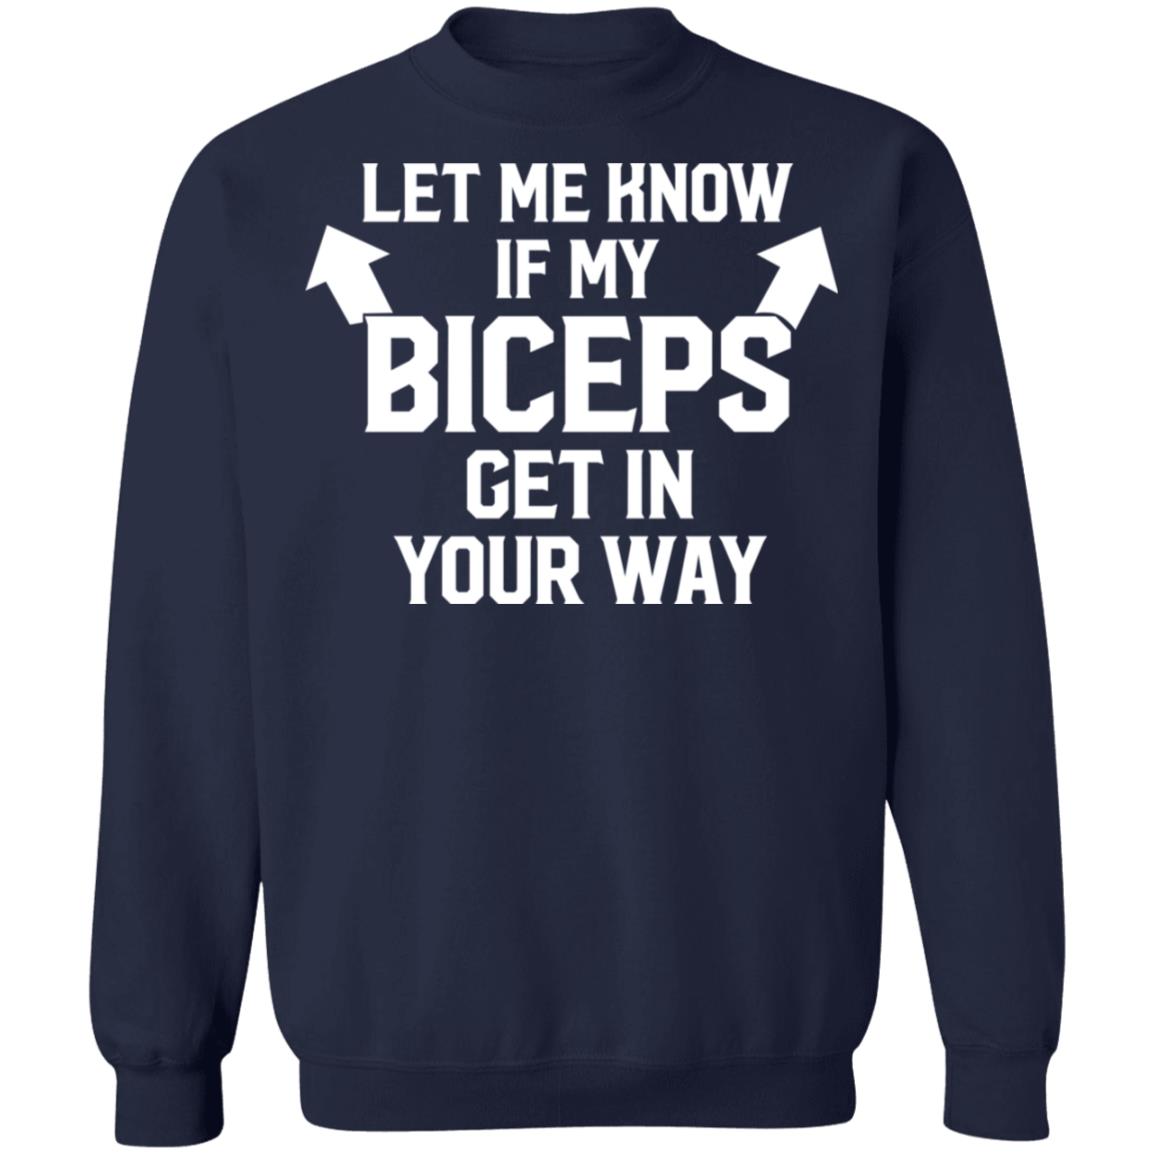 Let Me Know If My Biceps Get in Your Way Shirt, Training Shirt